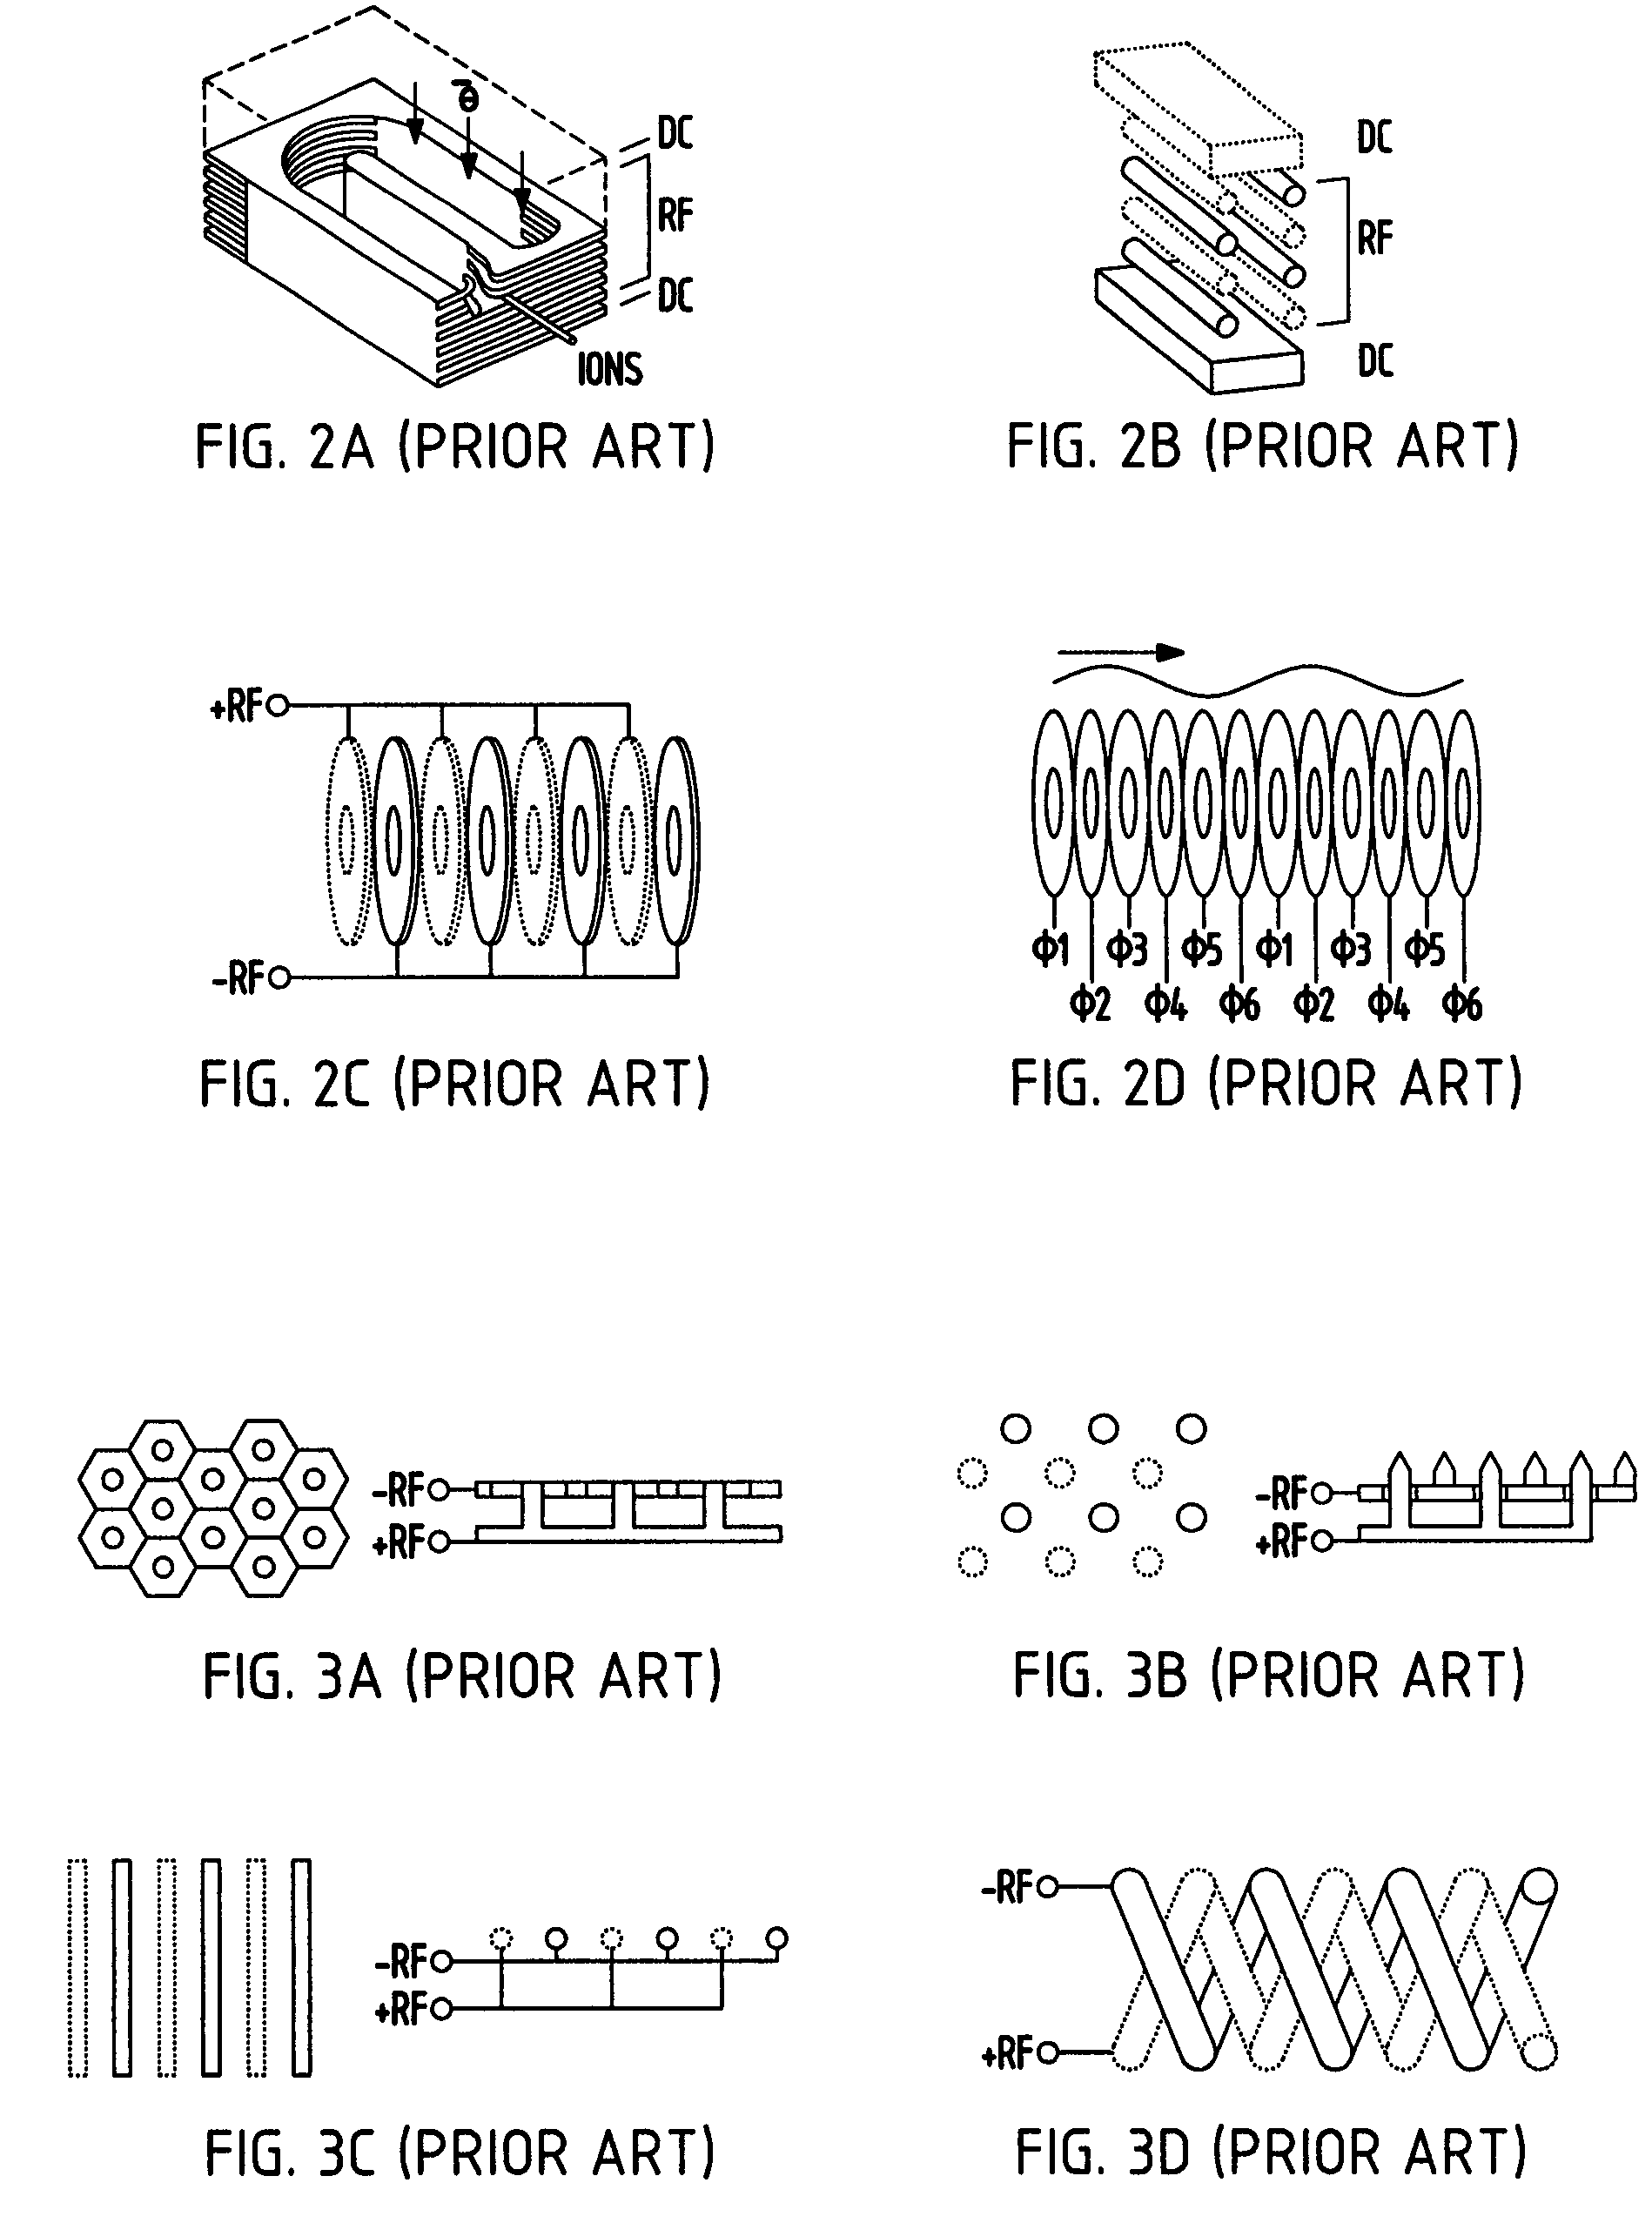 Method and apparatus for ion manipulation using mesh in a radio frequency field